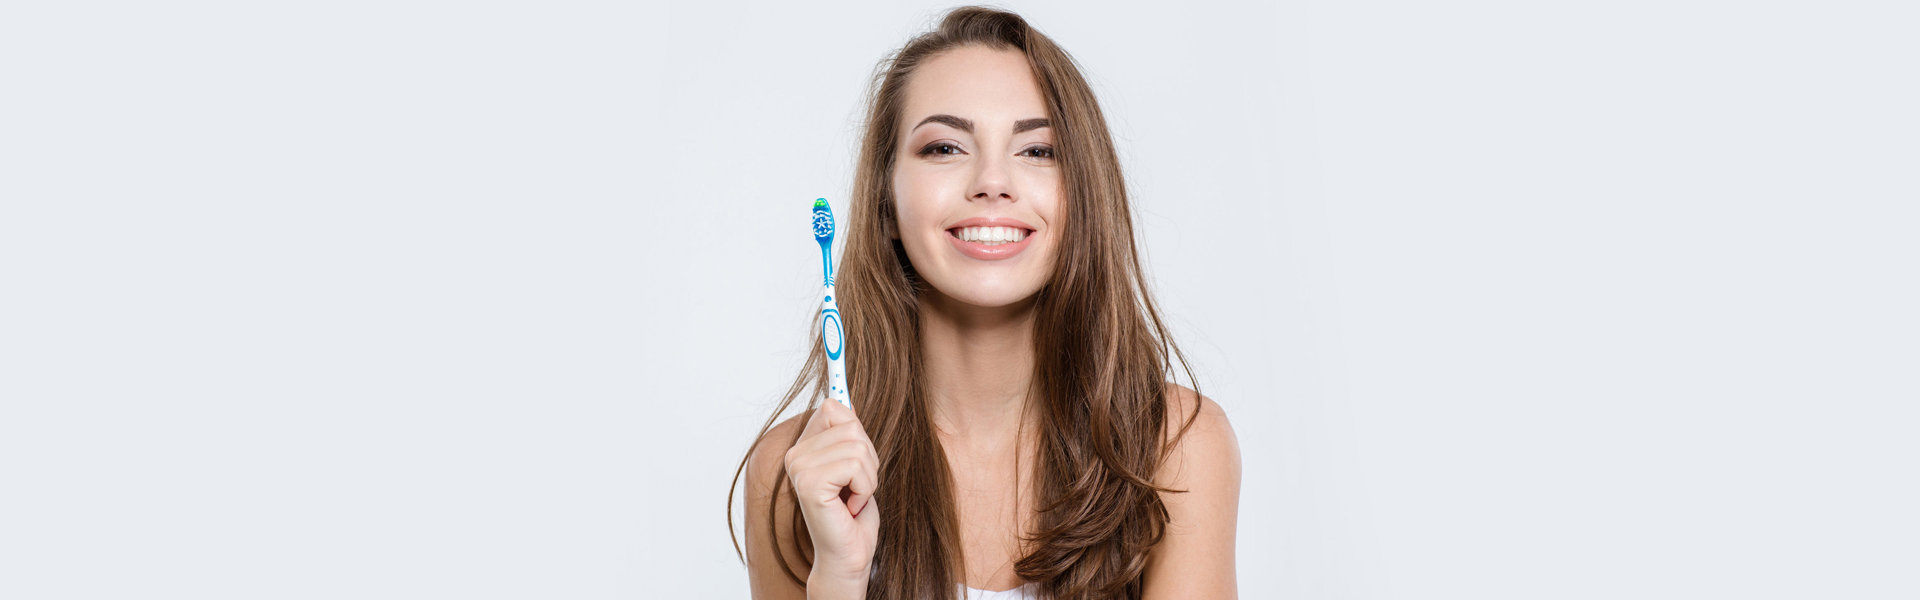 How to Select the Right Toothbrush